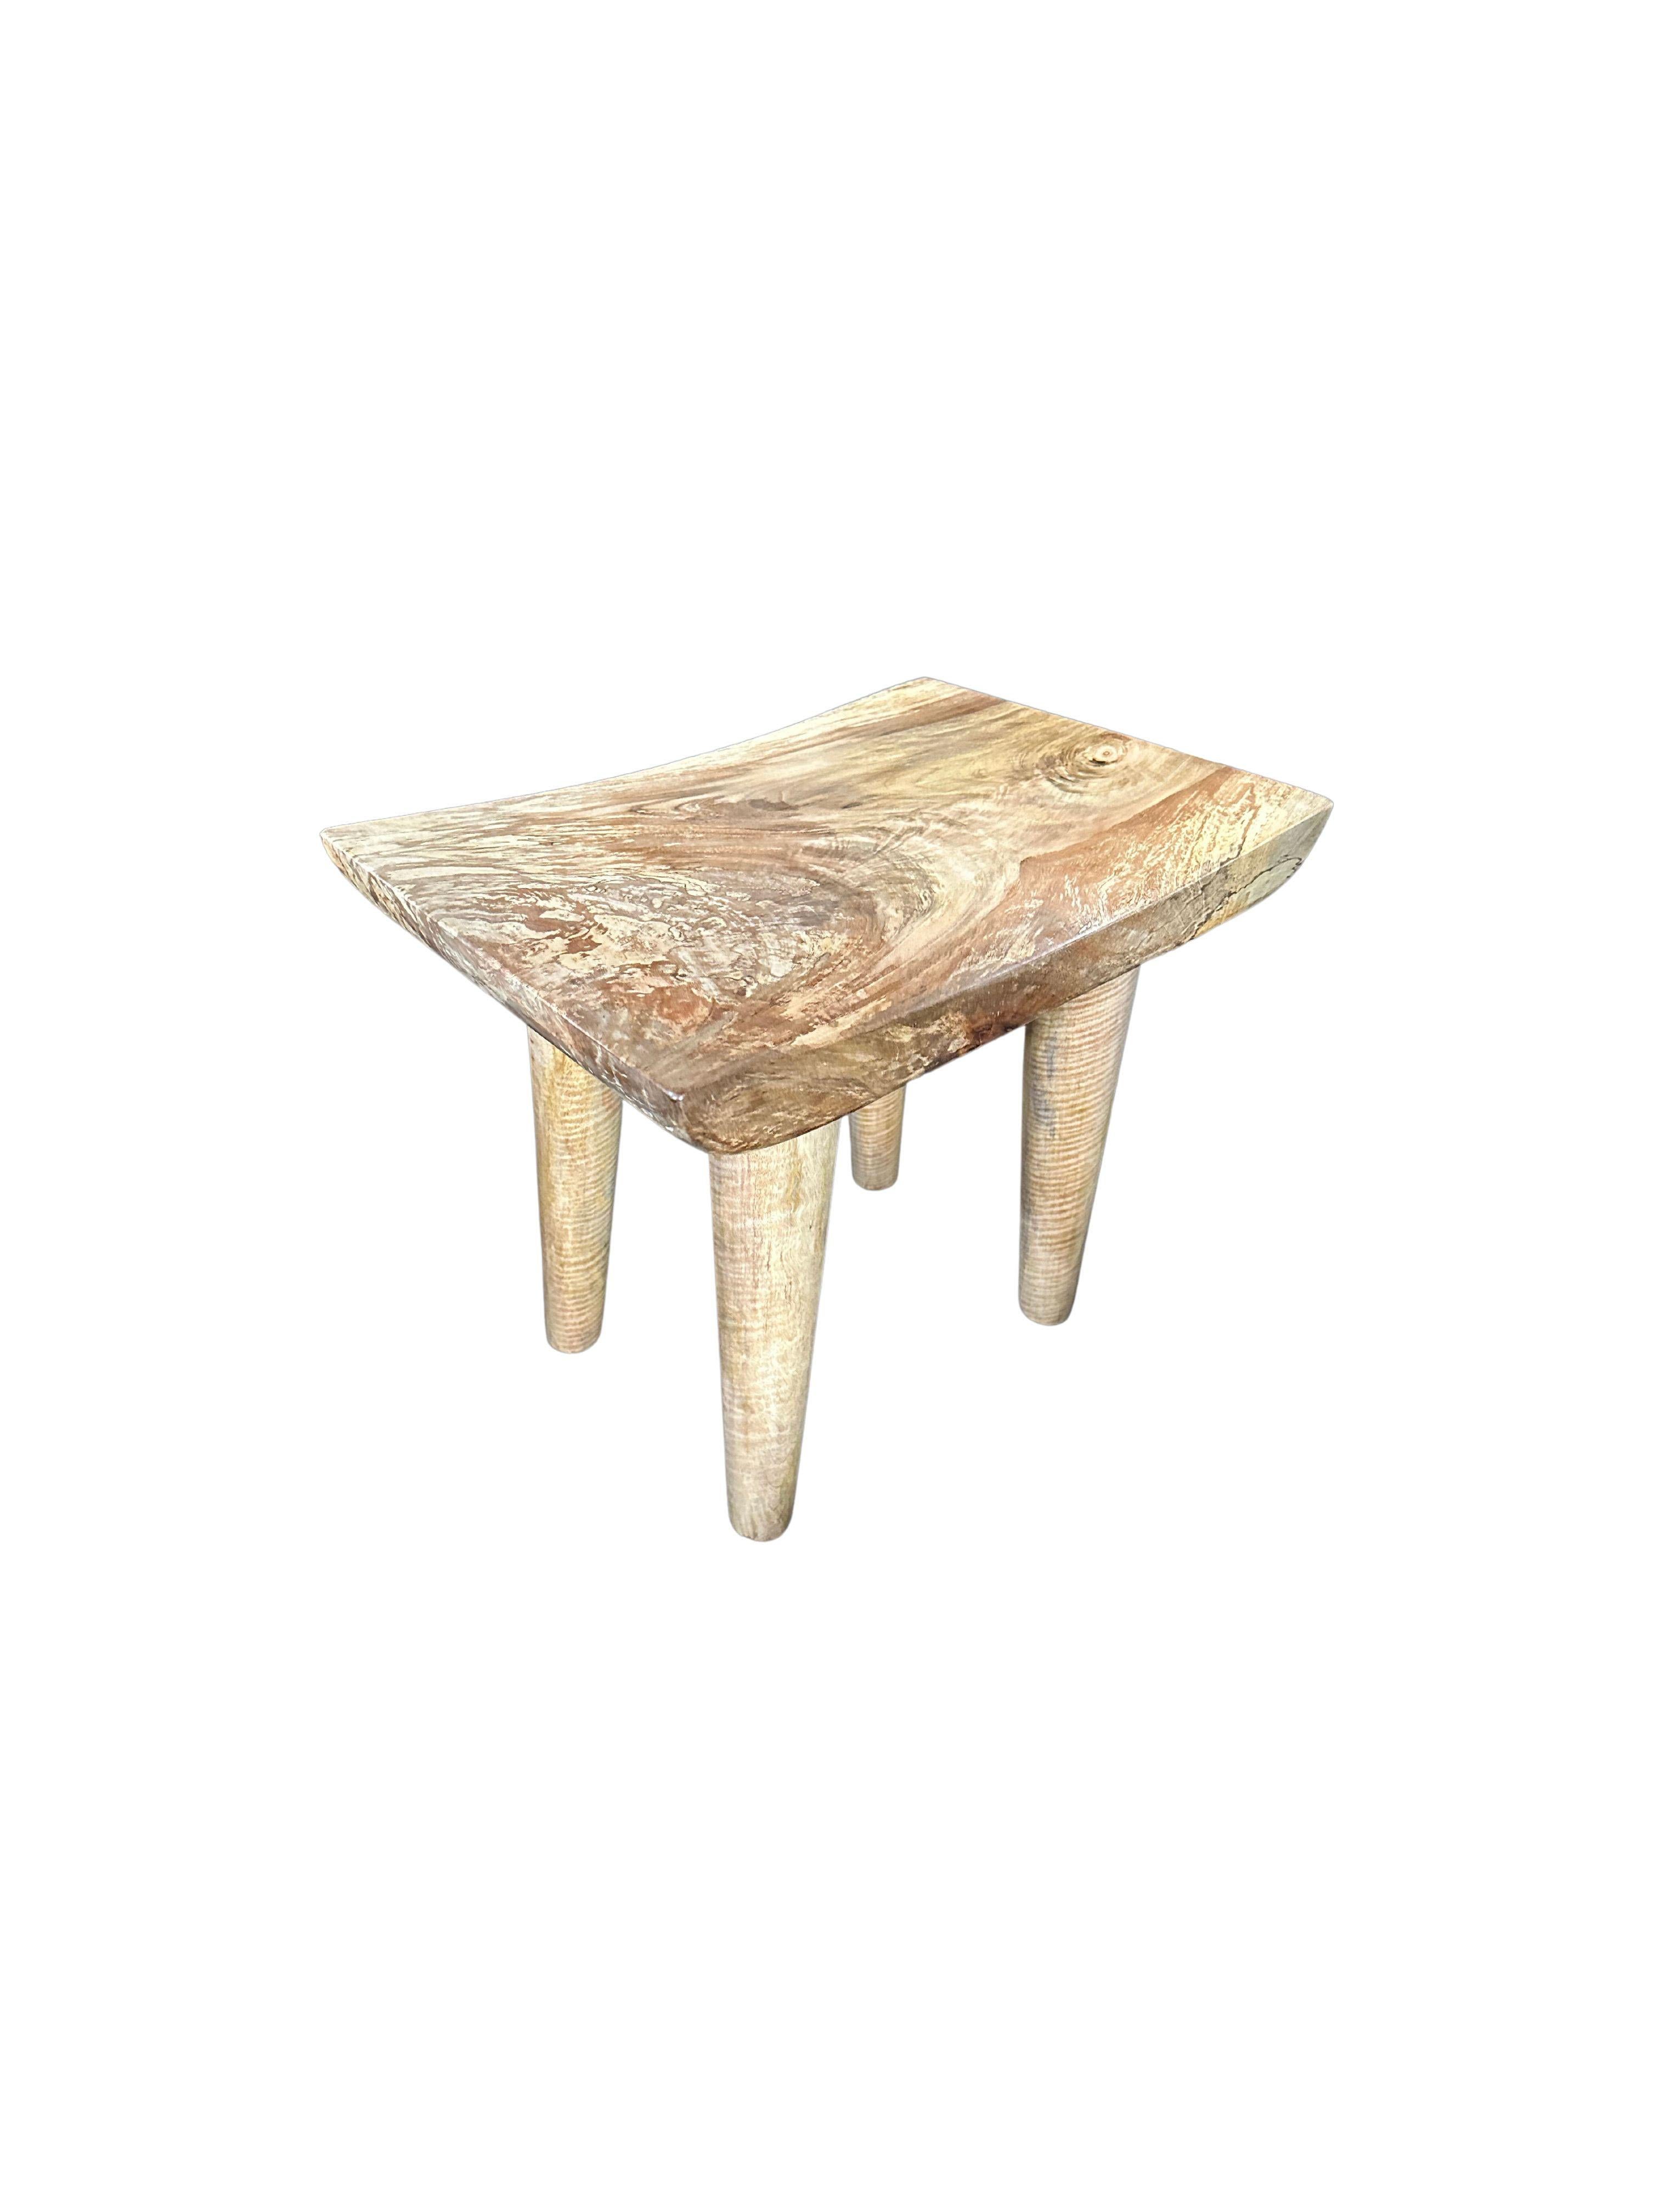 A wonderfully sculptural stool with a curved seat. The stool's neutral pigment and subtle wood texture makes it perfect for any space. A uniquely sculptural and versatile piece. This stool was crafted from solid mango wood.

